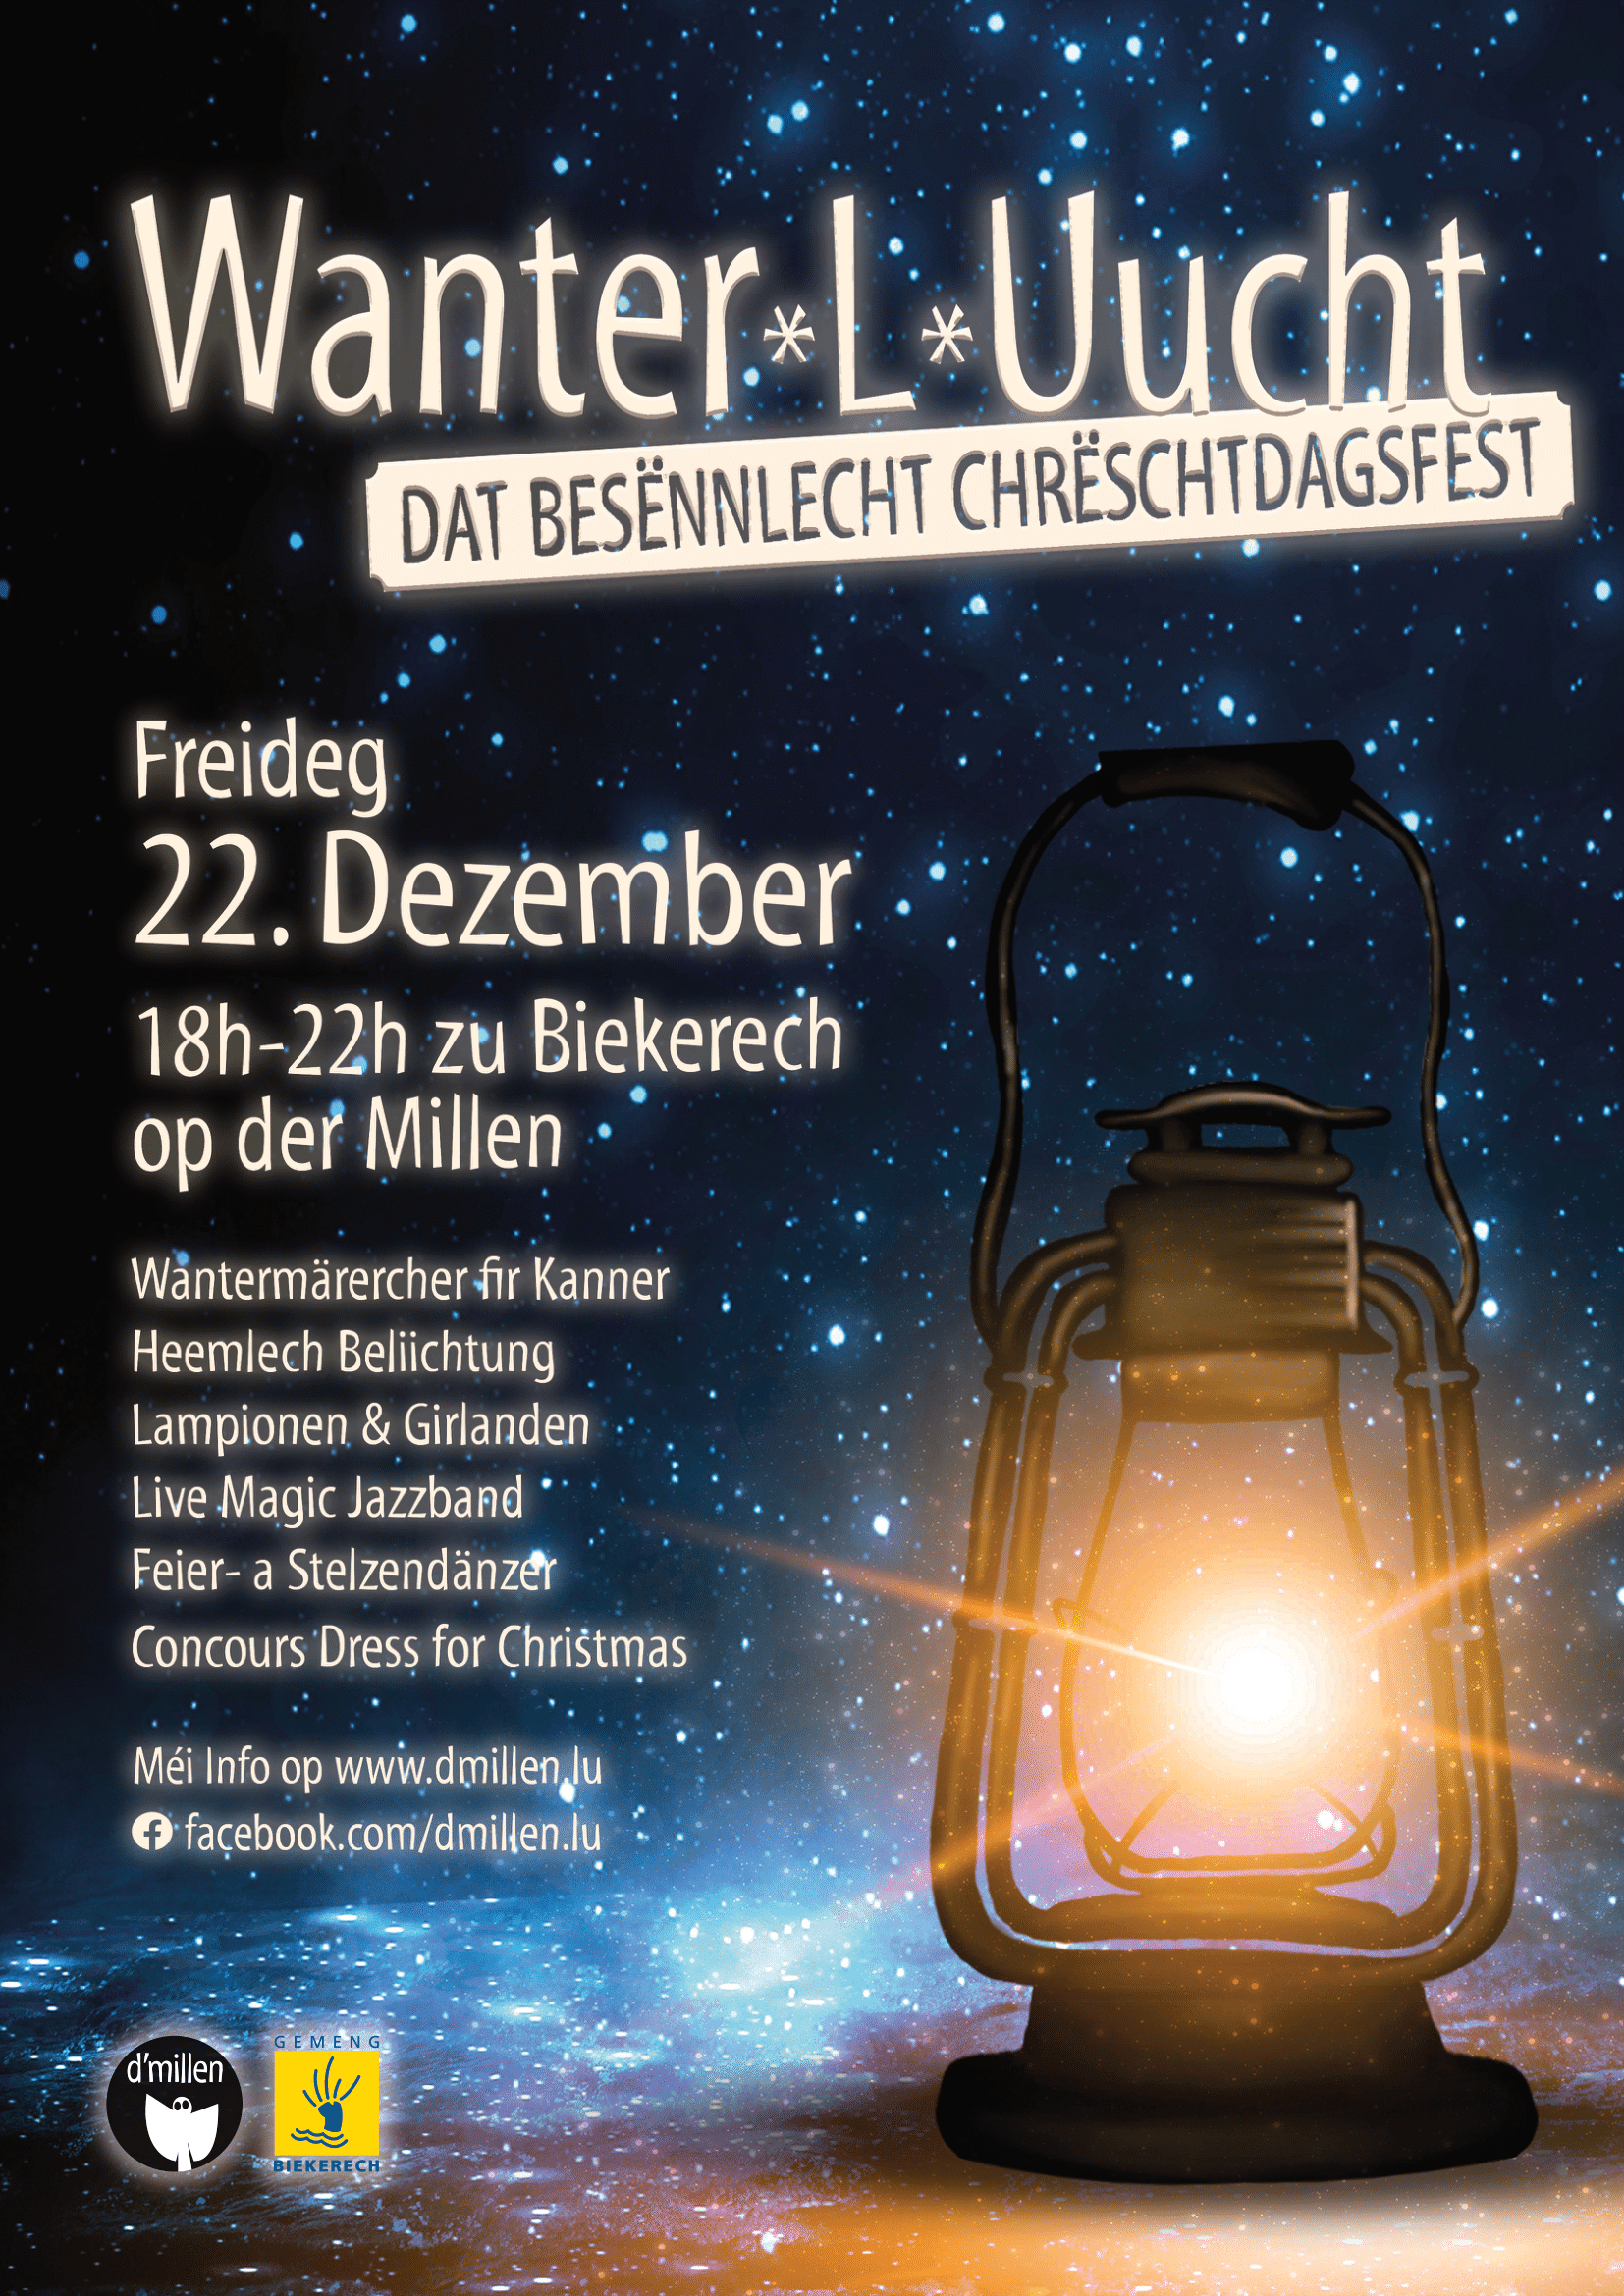 Winter-L-Ucht - the meaningful Christmas party in Biekerech on the mill!